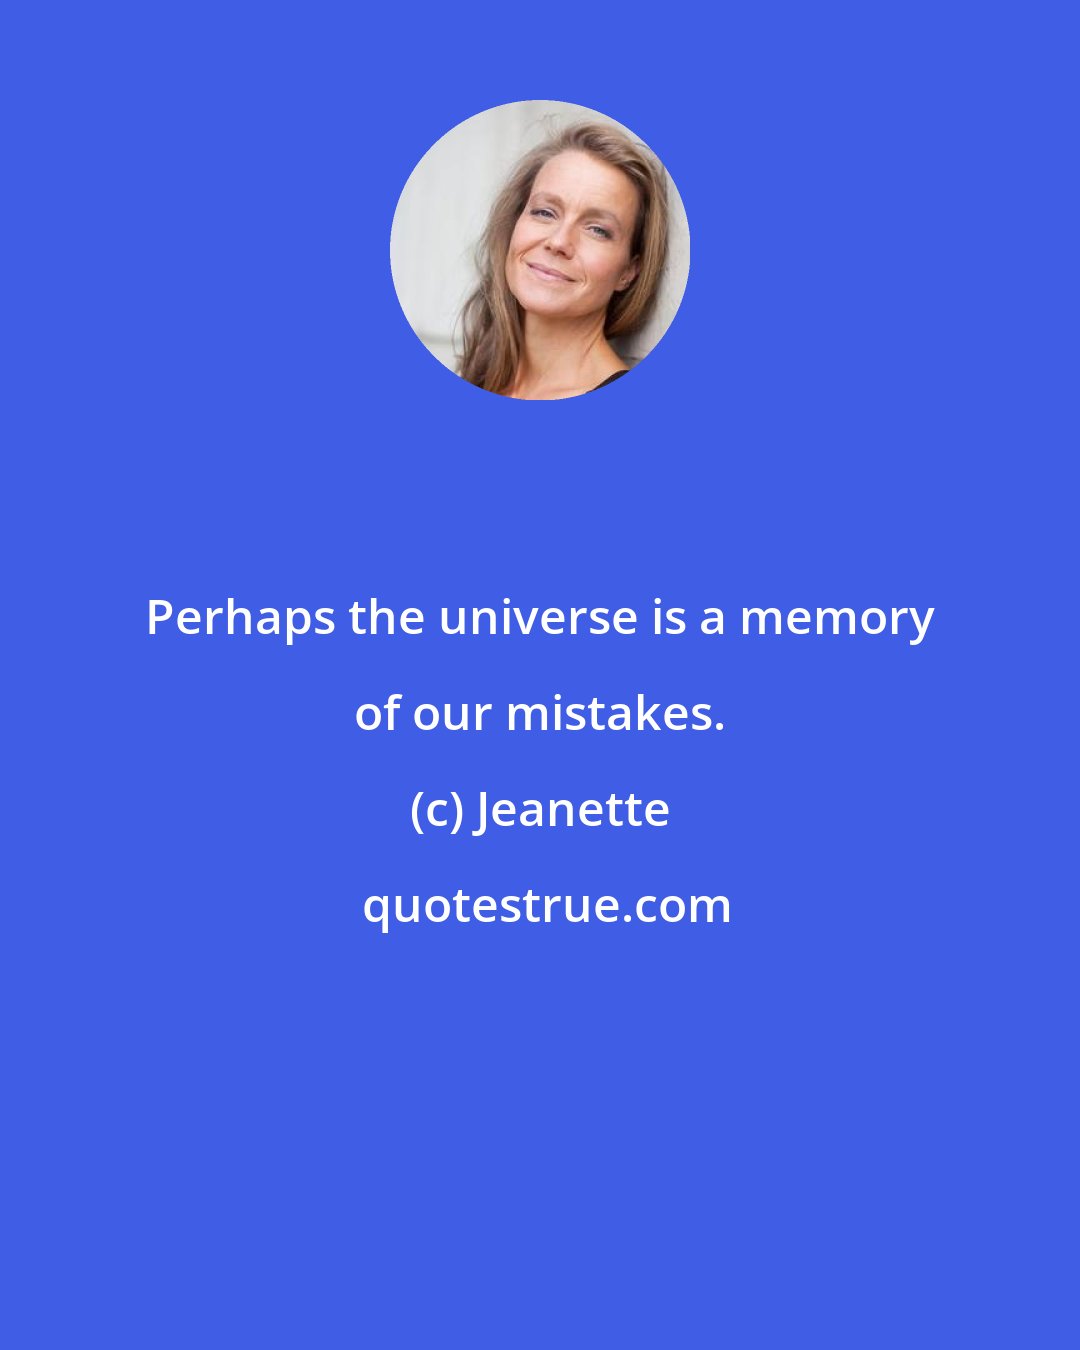 Jeanette: Perhaps the universe is a memory of our mistakes.